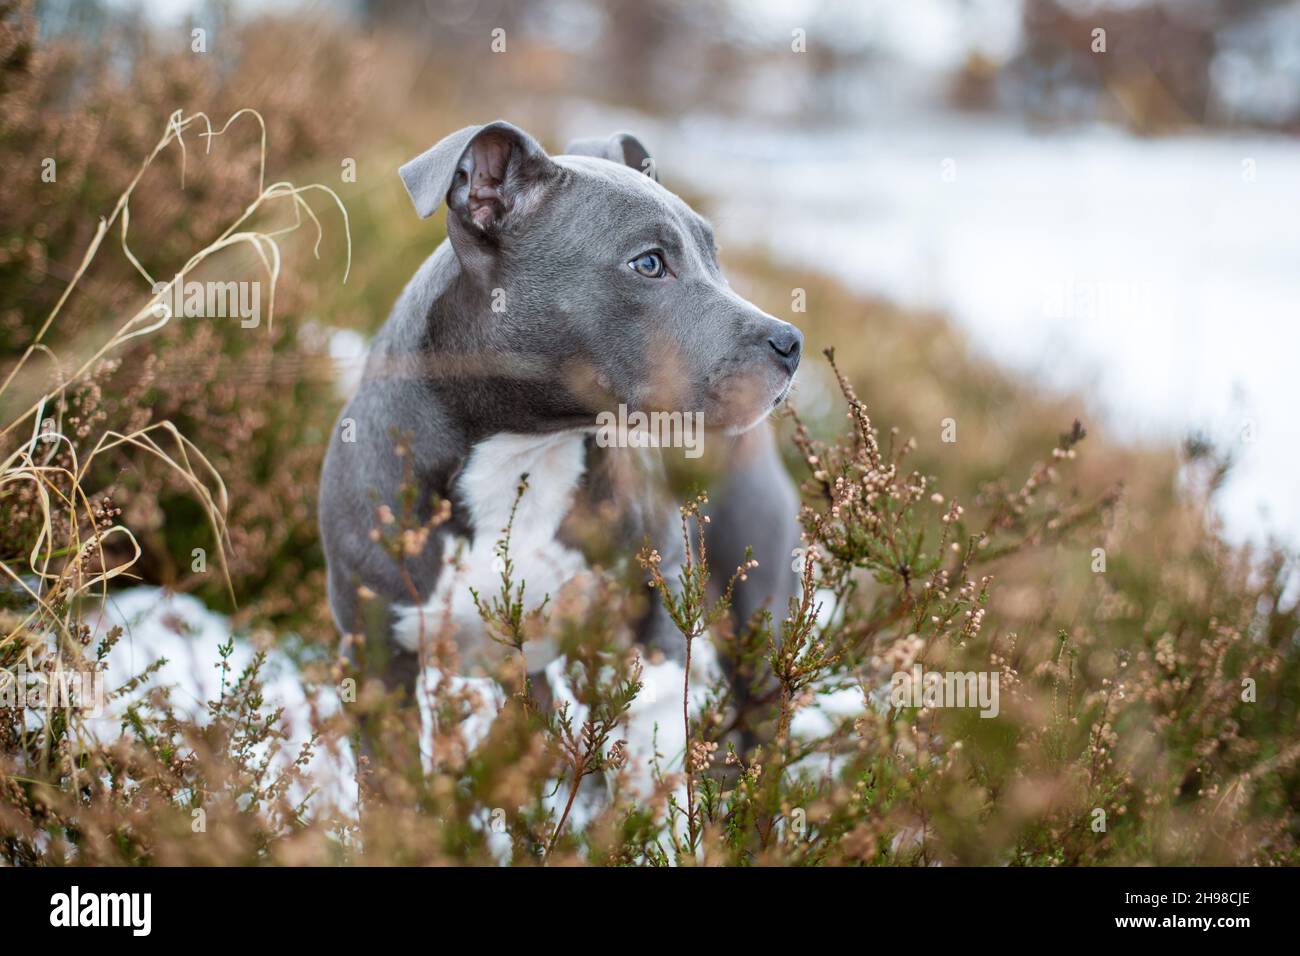 Blue American Staffordshire Terrier puppy Stock Photo